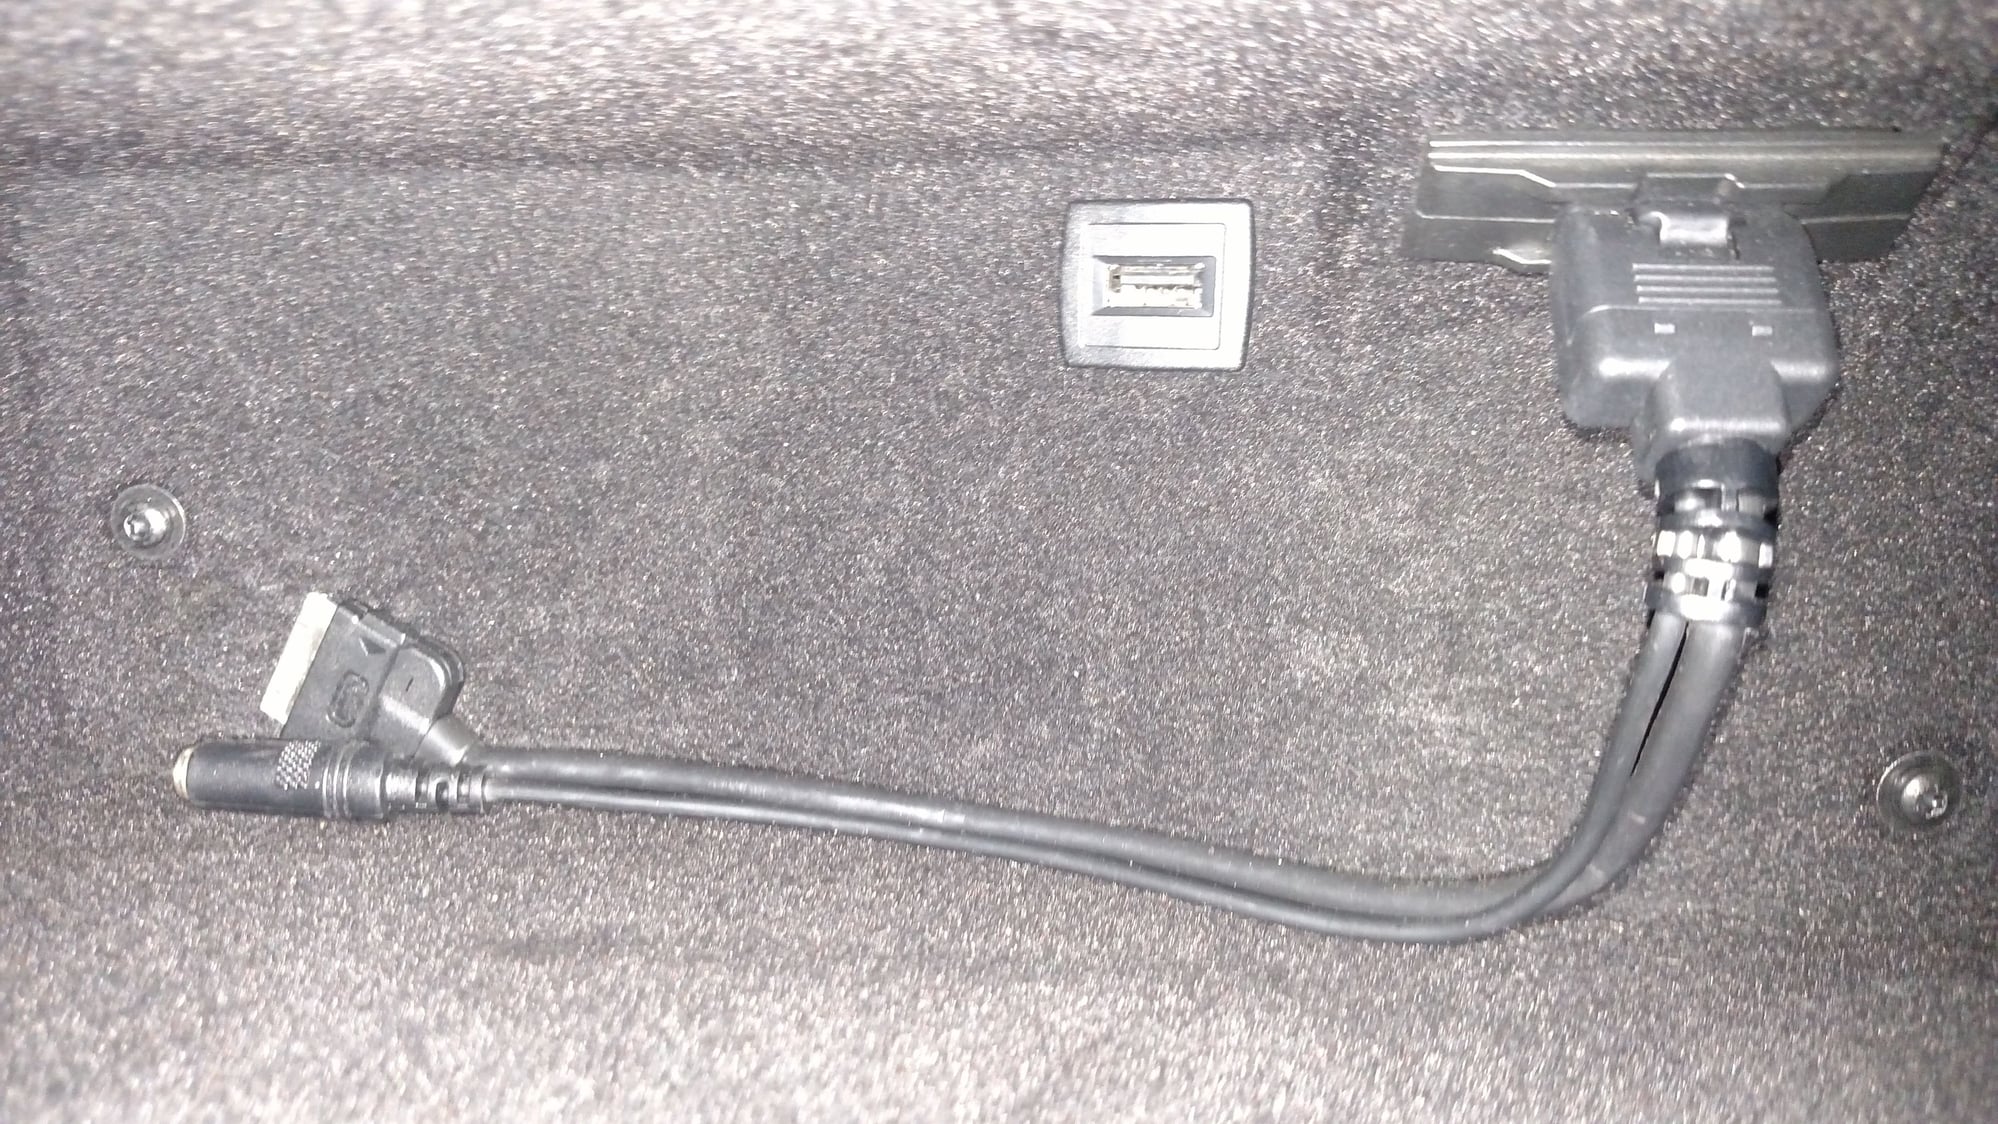 Genuine Mercedes-Benz MI iPod/AUX Connecting Adapter Cable A001 827 85 04